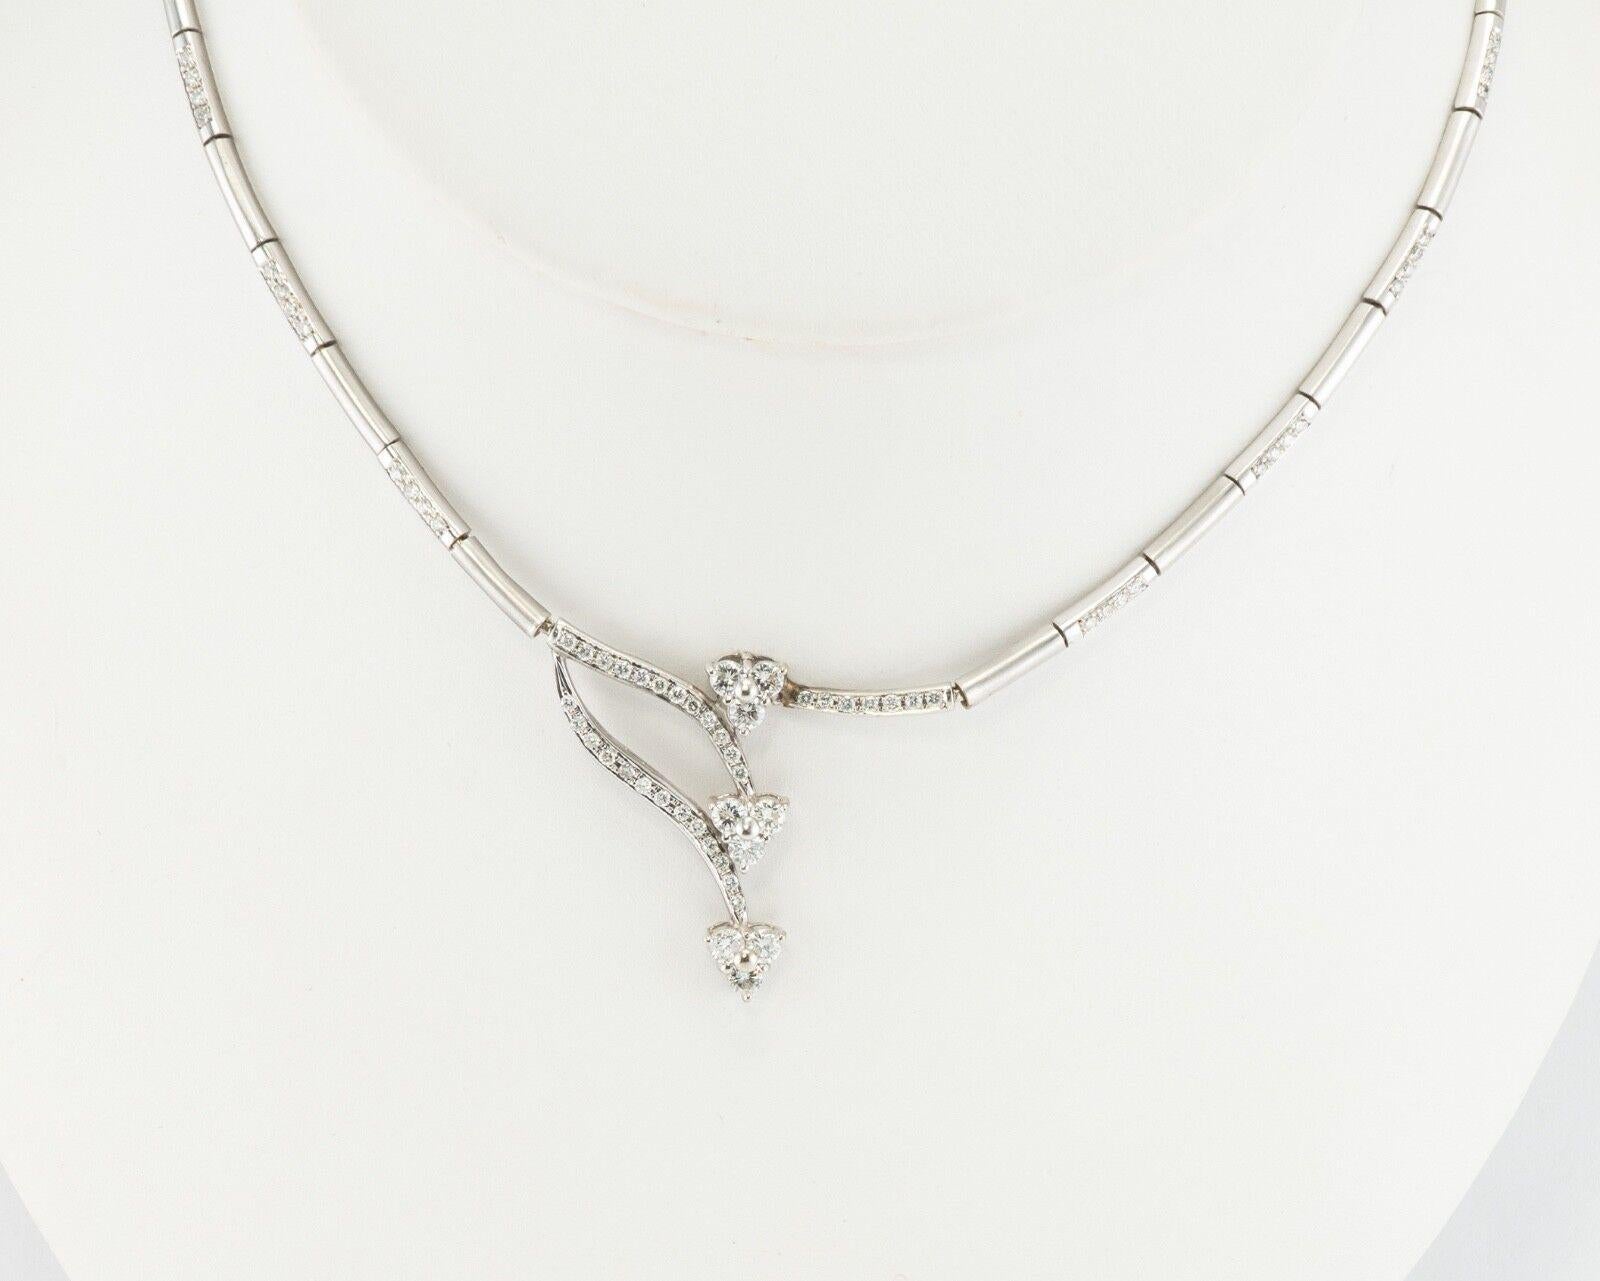 Diamond Necklace 14K White Gold Choker 1.40 TDW

This beautiful estate necklace is finely crafted in solid 14K White Gold and set with white and fiery diamonds. The center presentation holds nine round brilliant cut diamonds and 32 smaller gems for